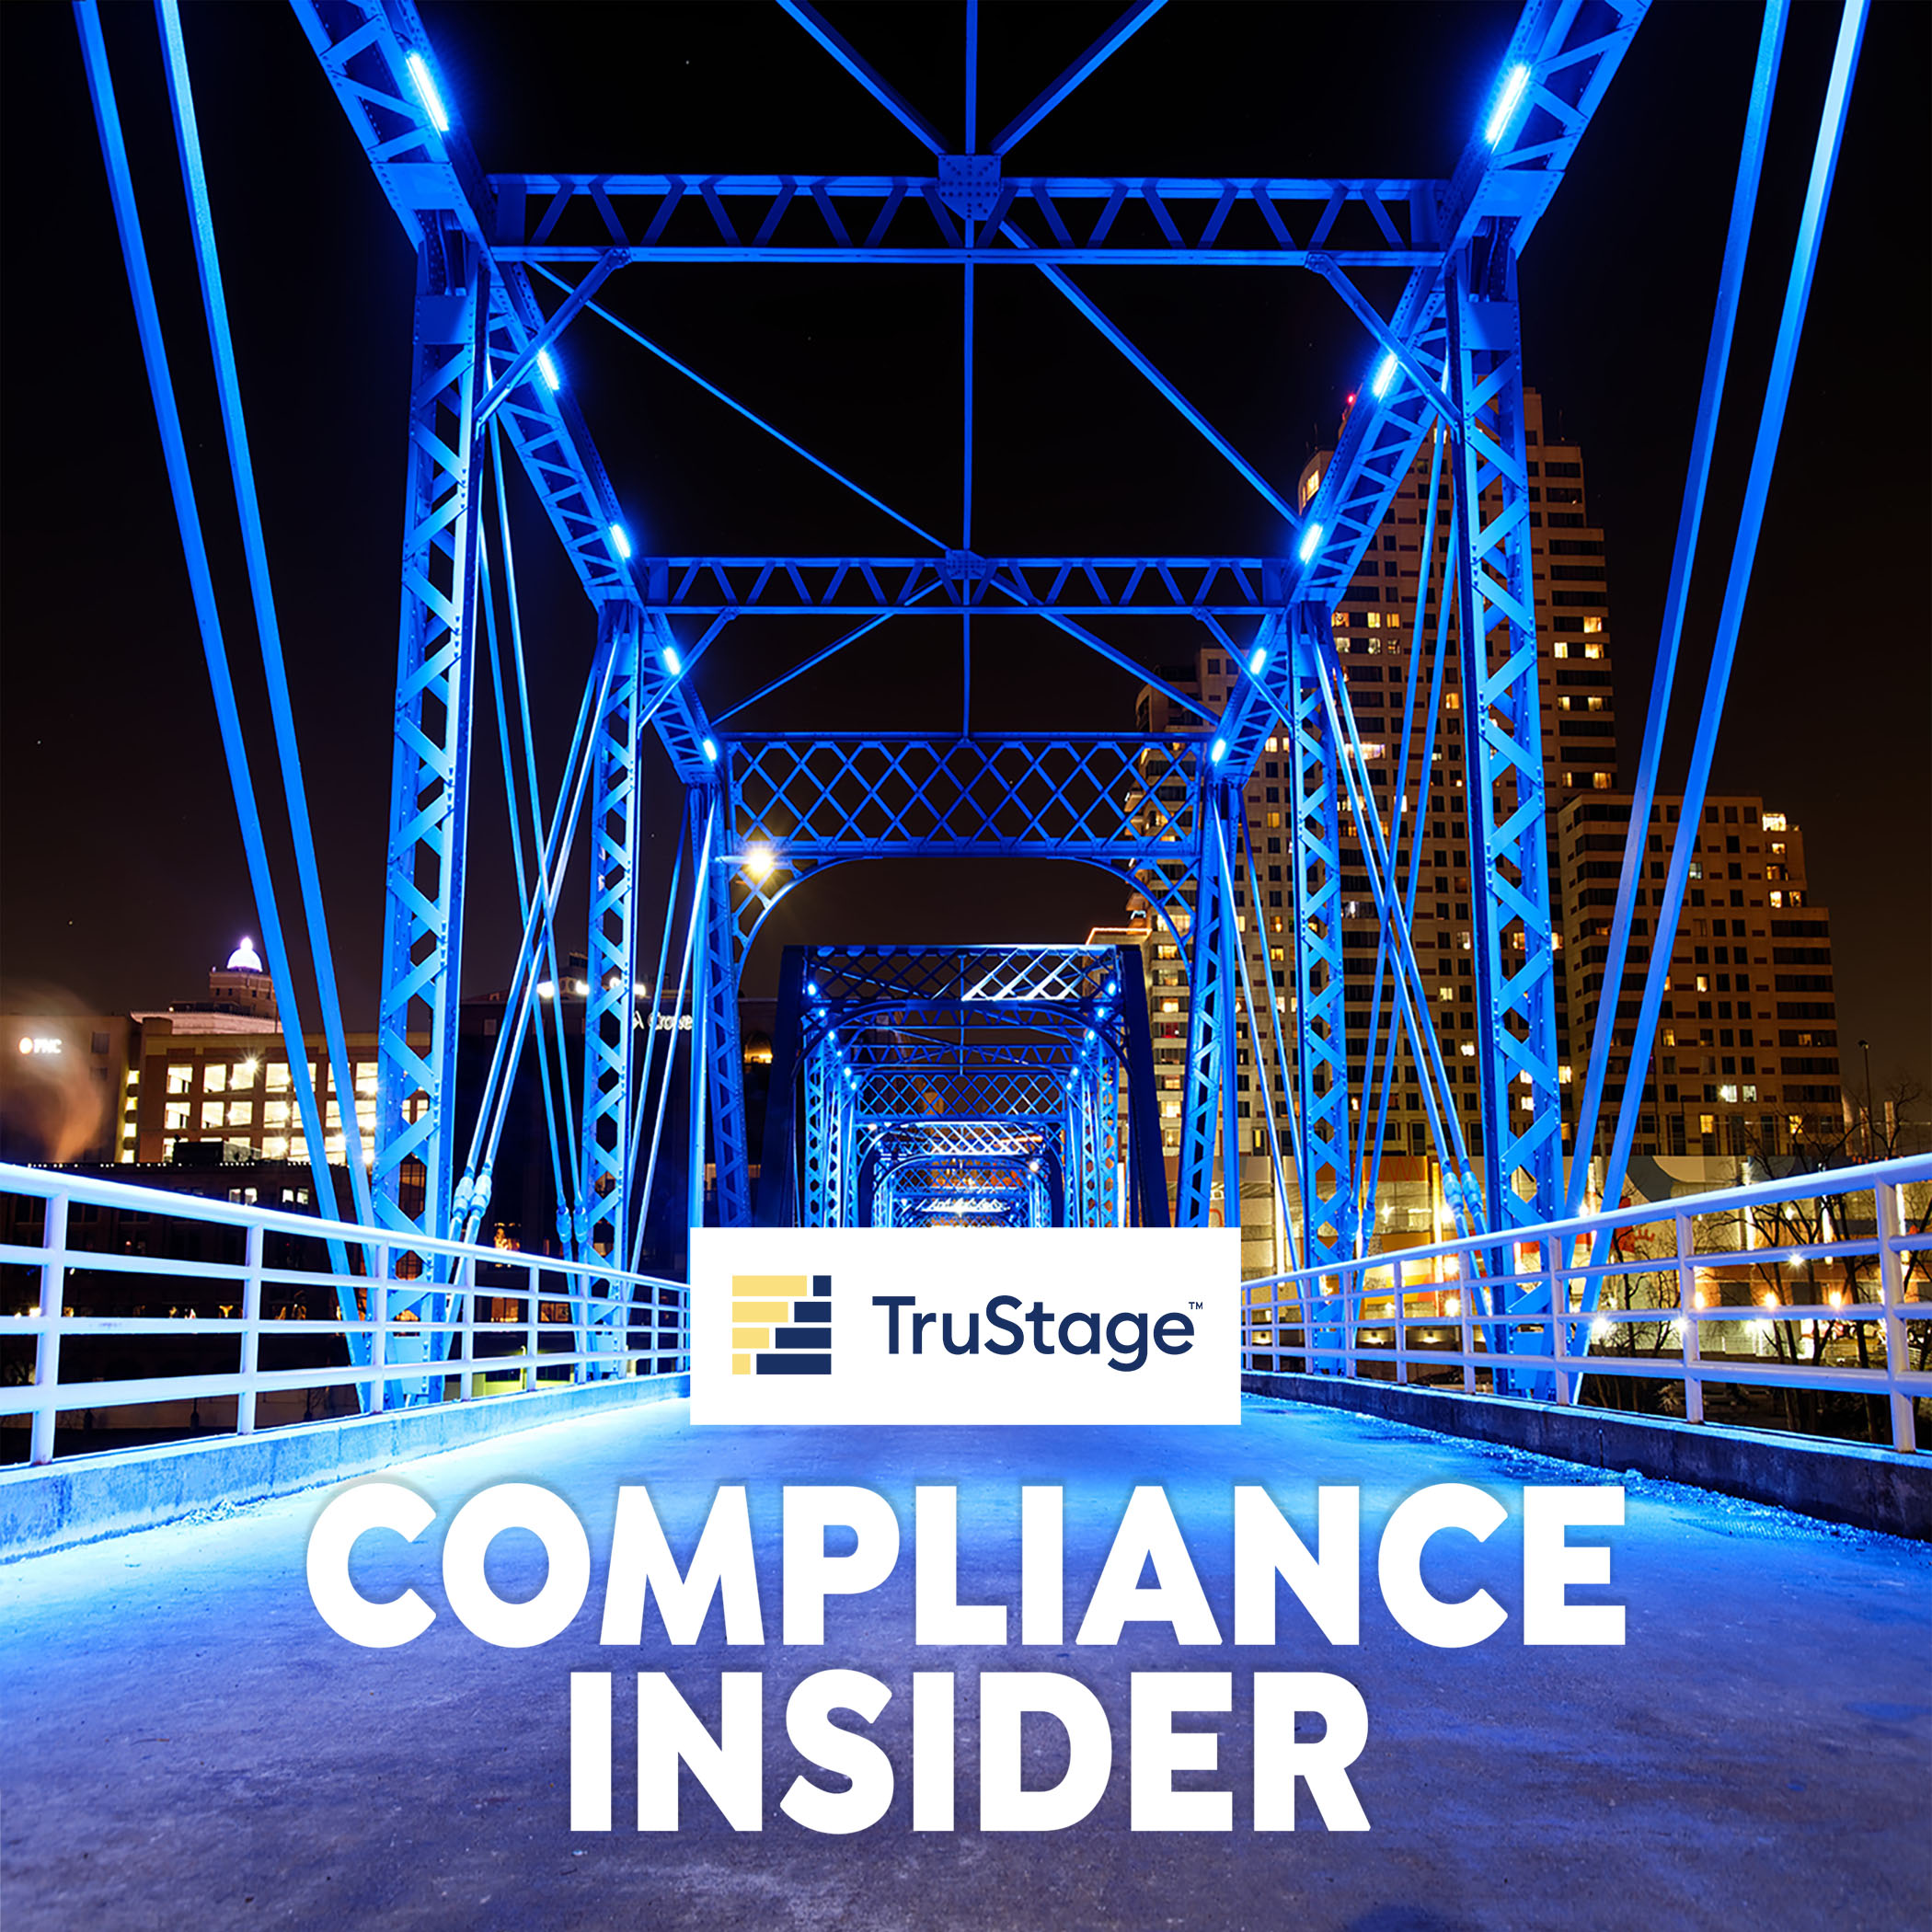 Compliance Insider by TruStage